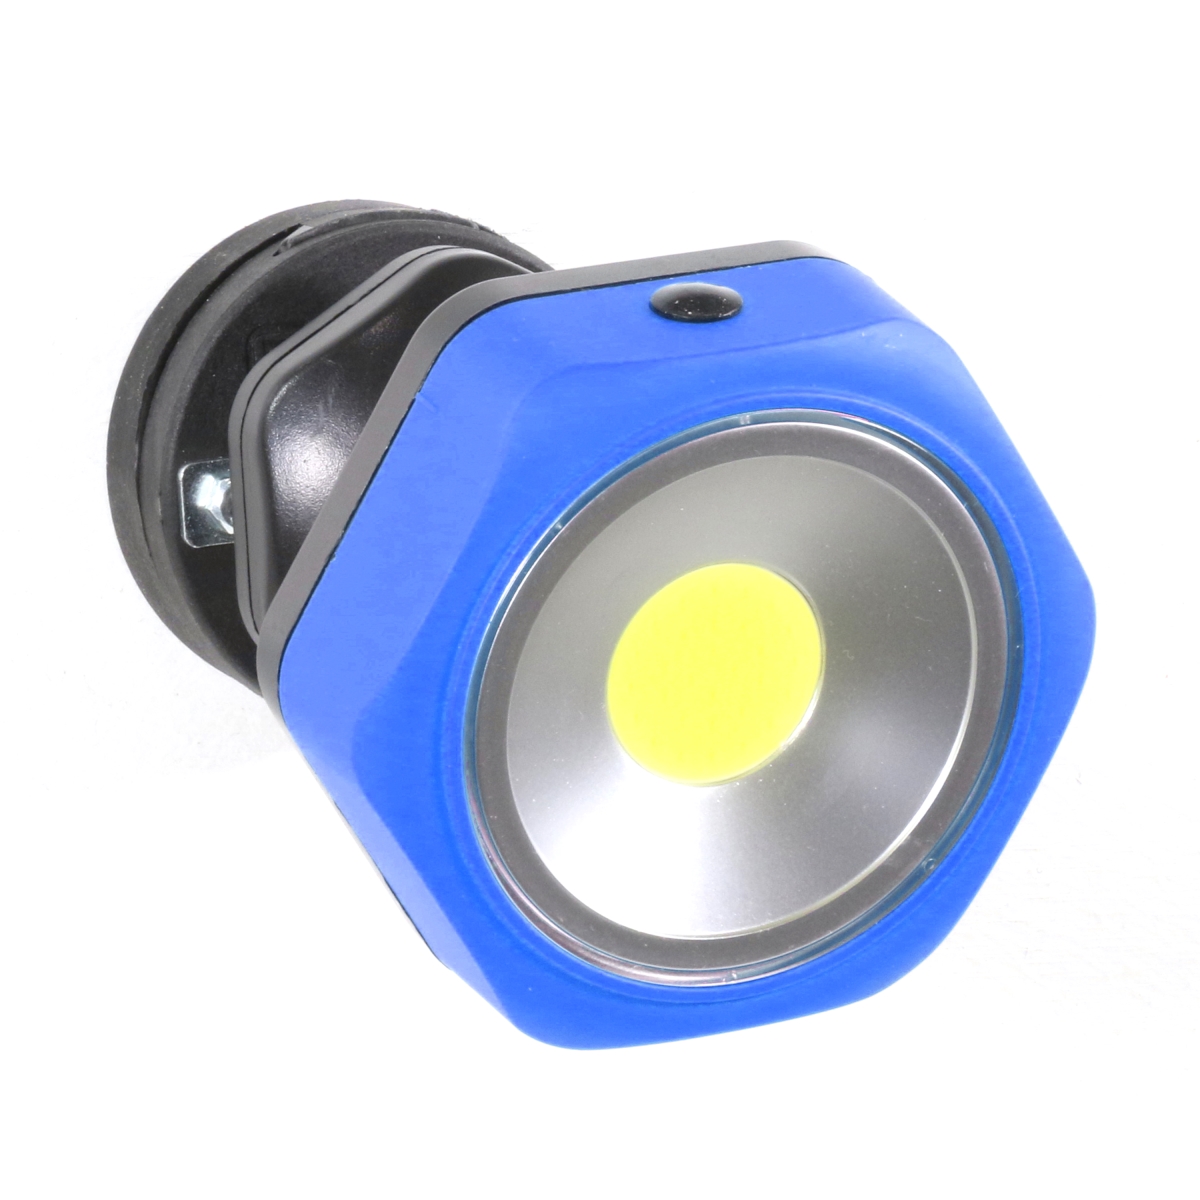 Picture of Clam 3016.0127 16943 ClamLock LED Light